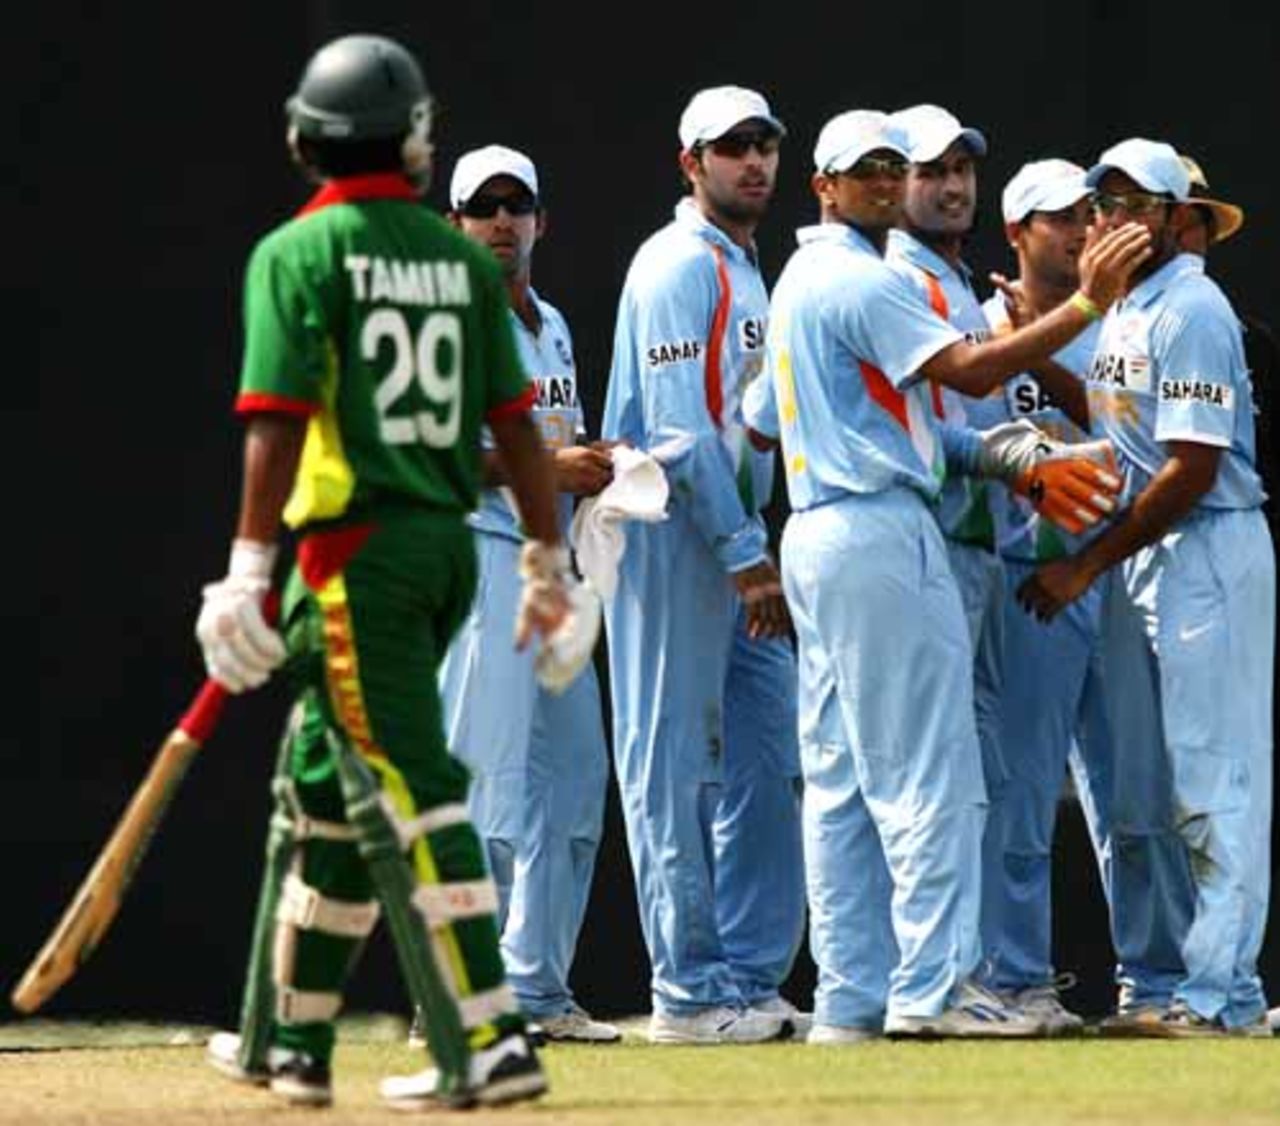 A disappointed Tamim Iqbal walks back after a horrible mixup with Javed Omar, Bangladesh v India, 2nd ODI, Mirpur, May 12, 2007